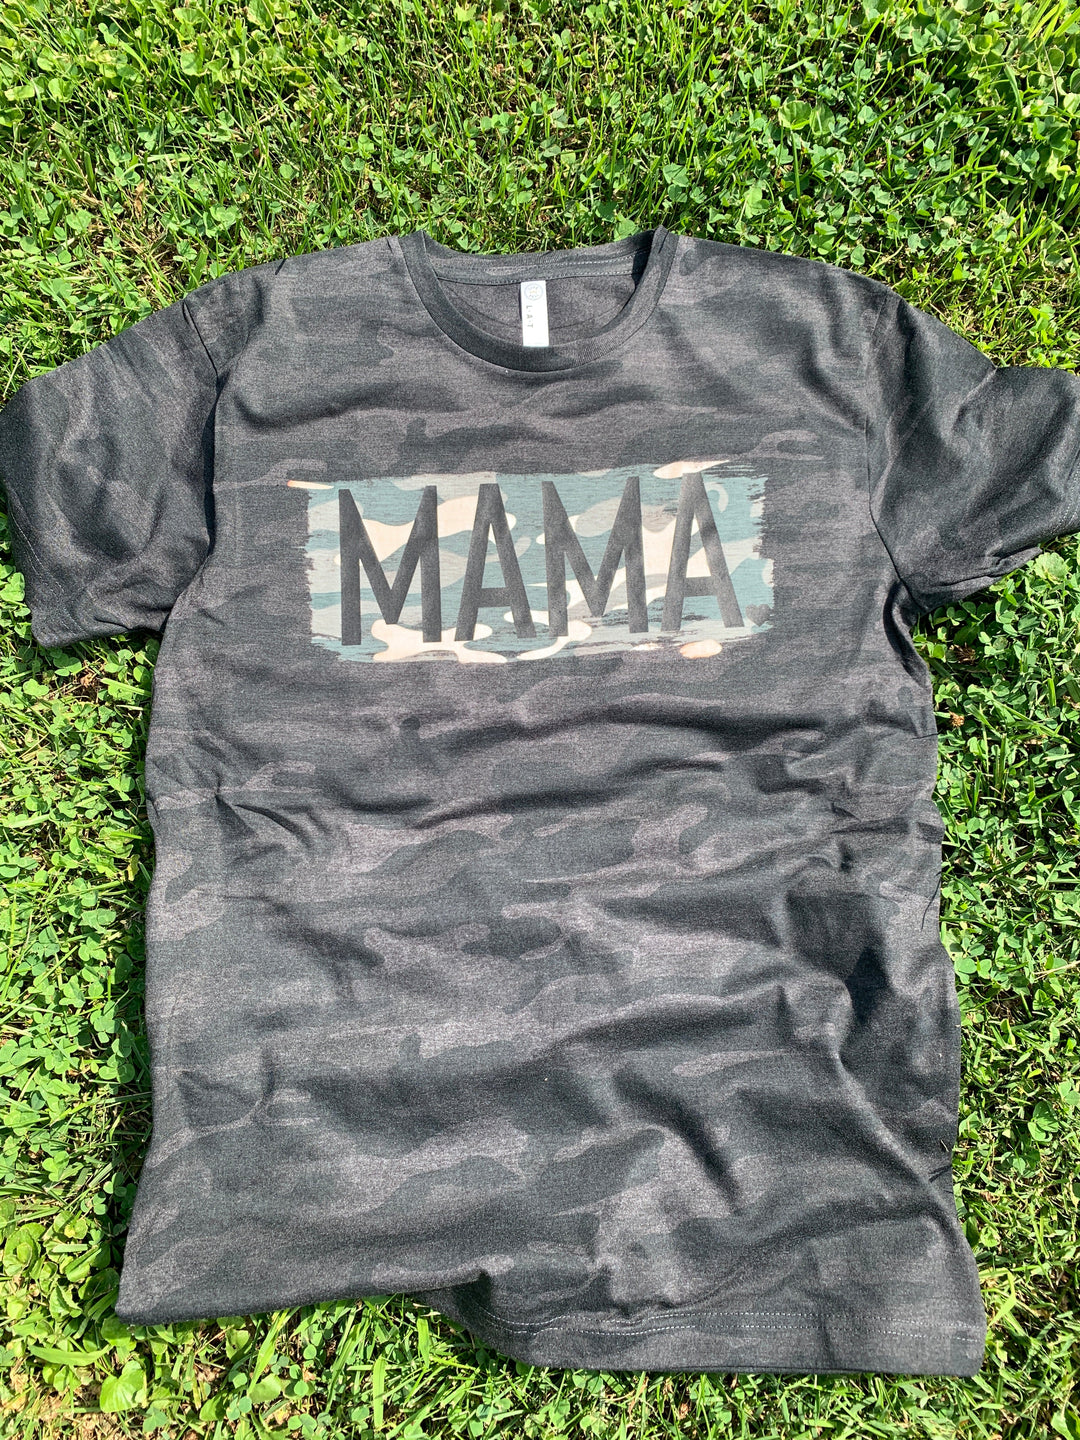 Mama Bleached Storm Camo Tee ships in 7-10 business days